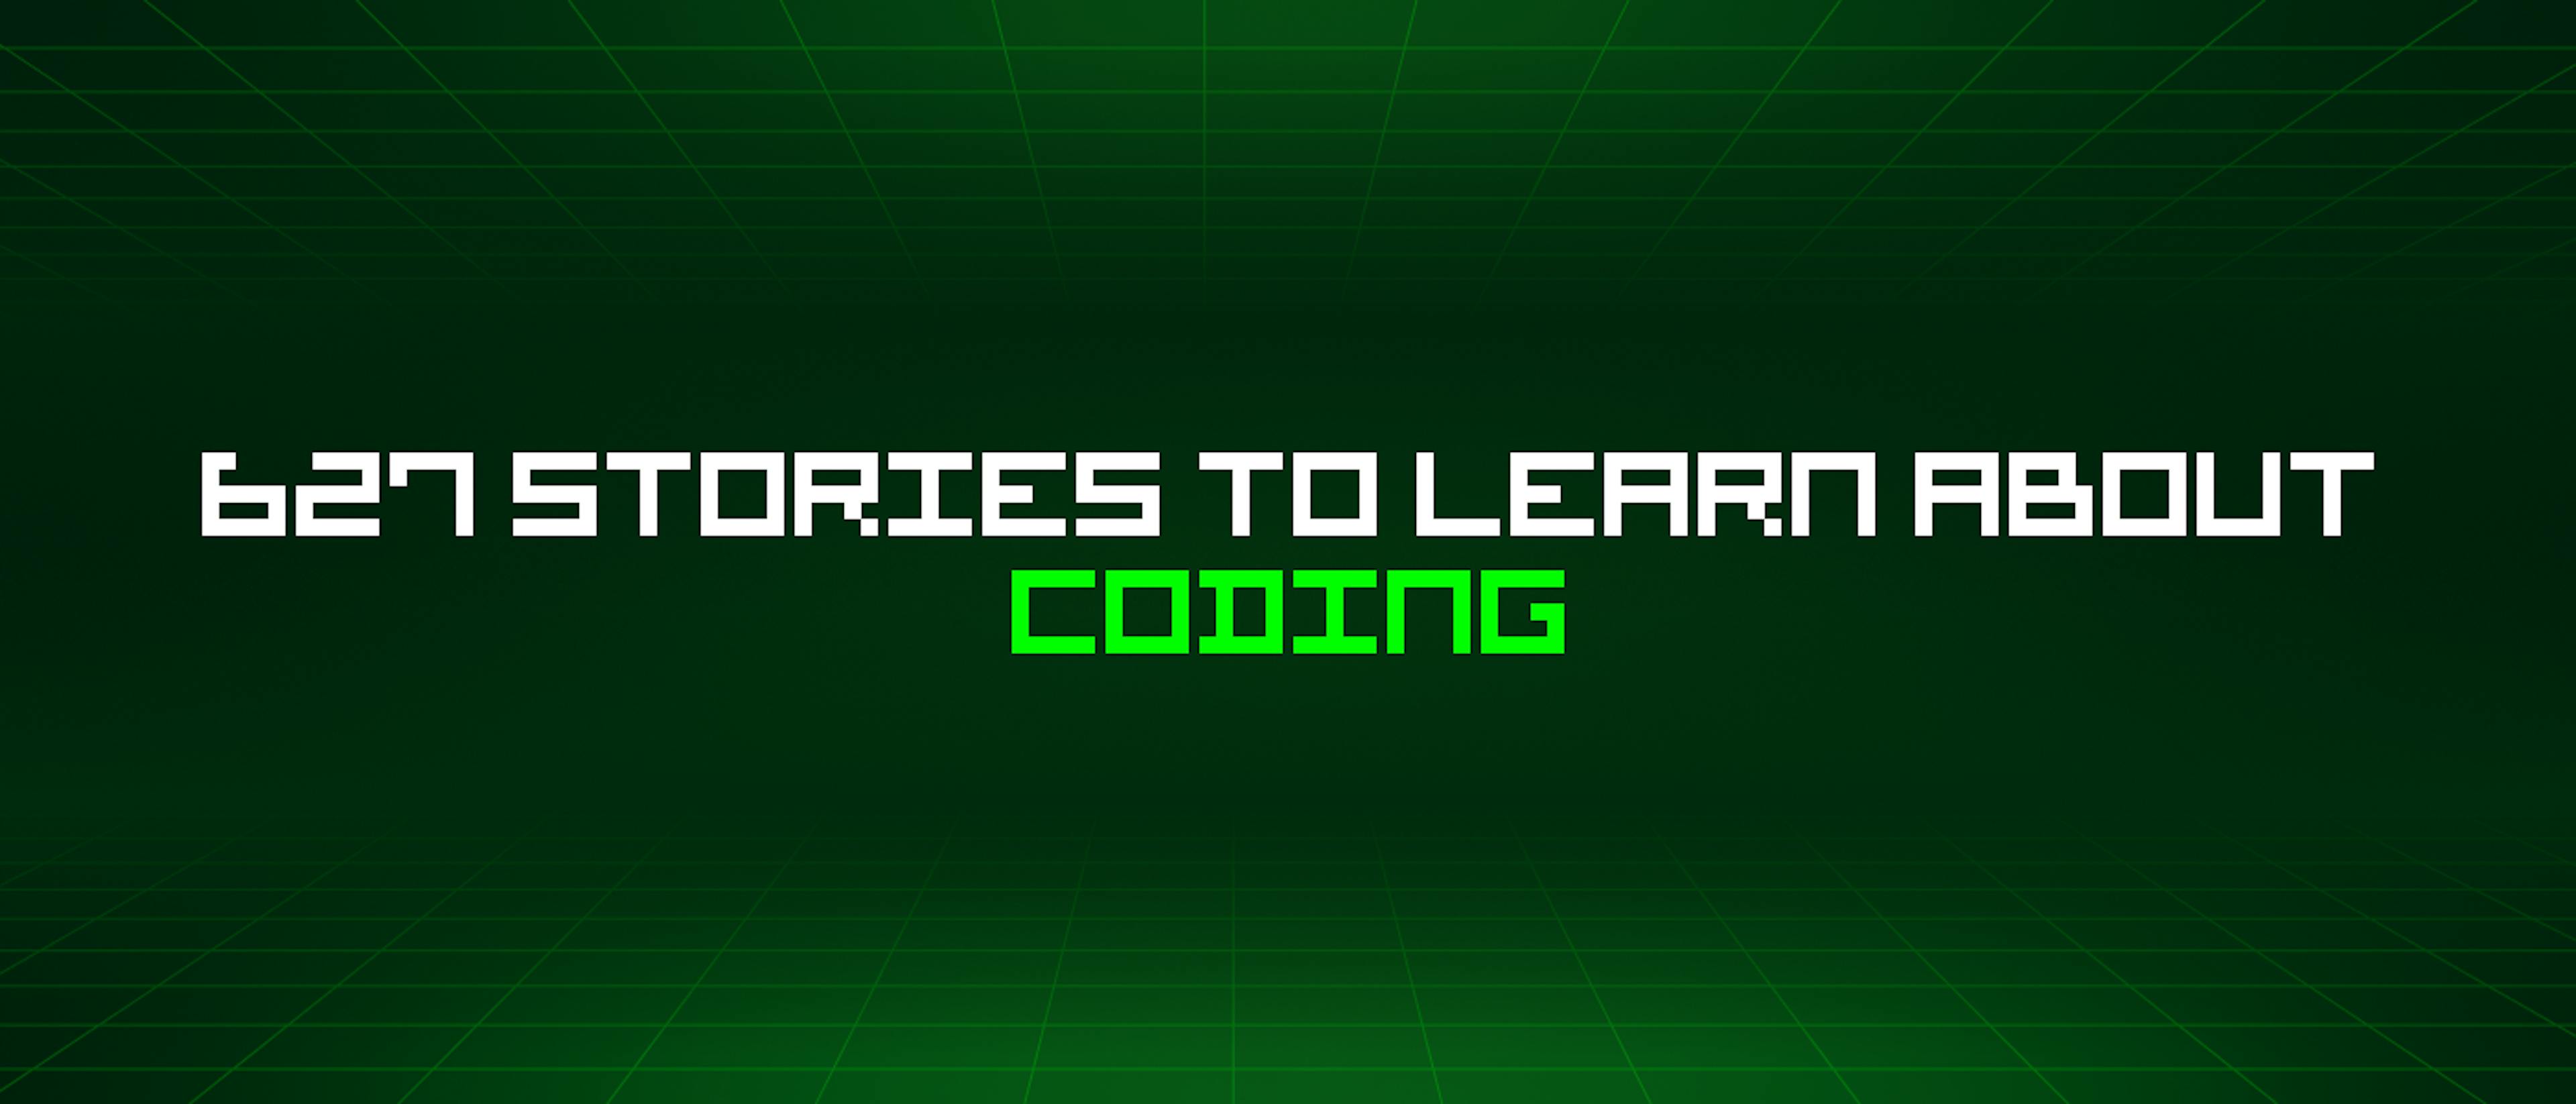 featured image - 627 Stories To Learn About Coding